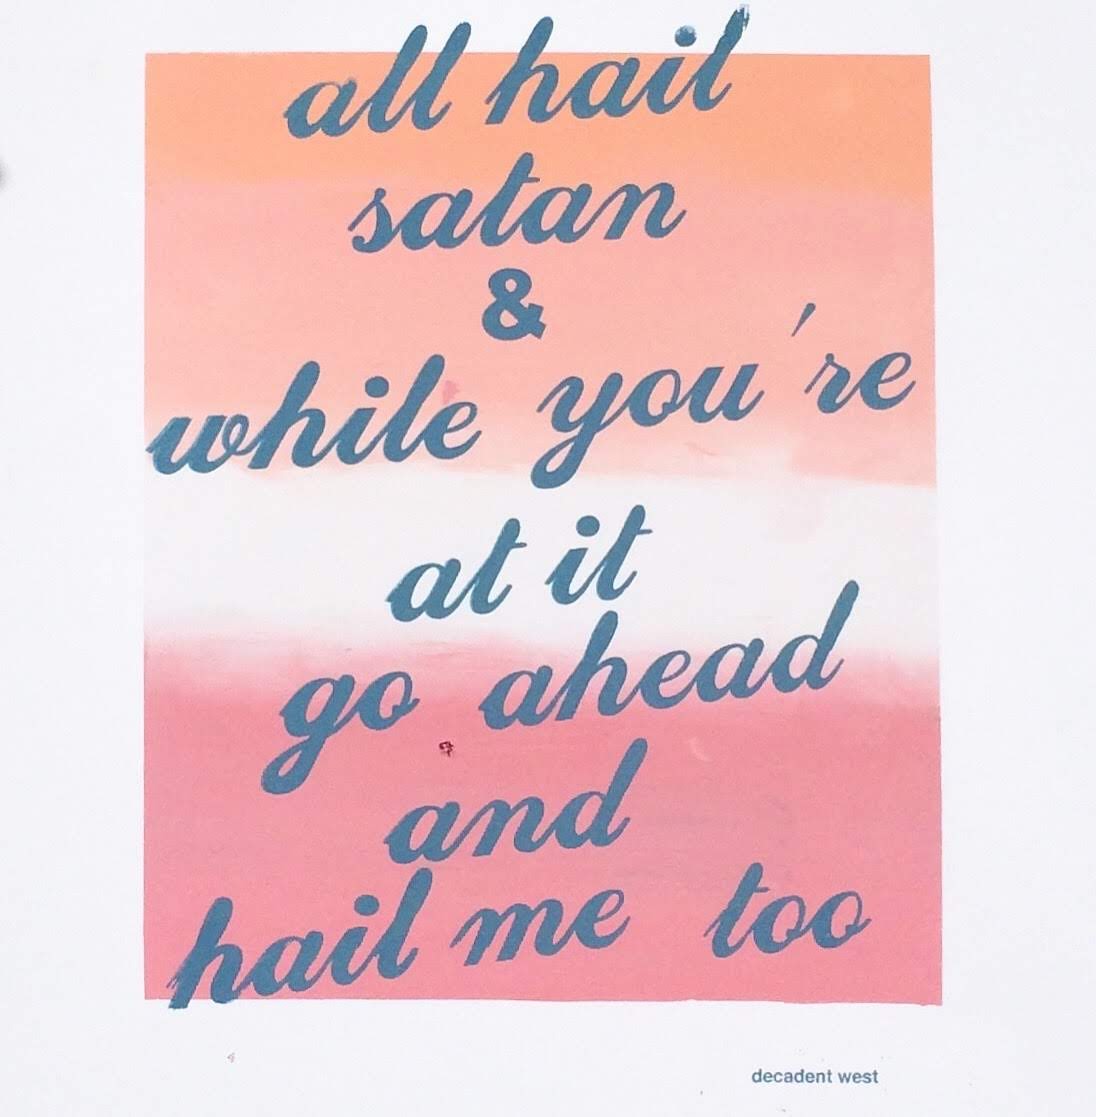 screenprint with text "all hail satan and while youre at it go ahead & hail me too"